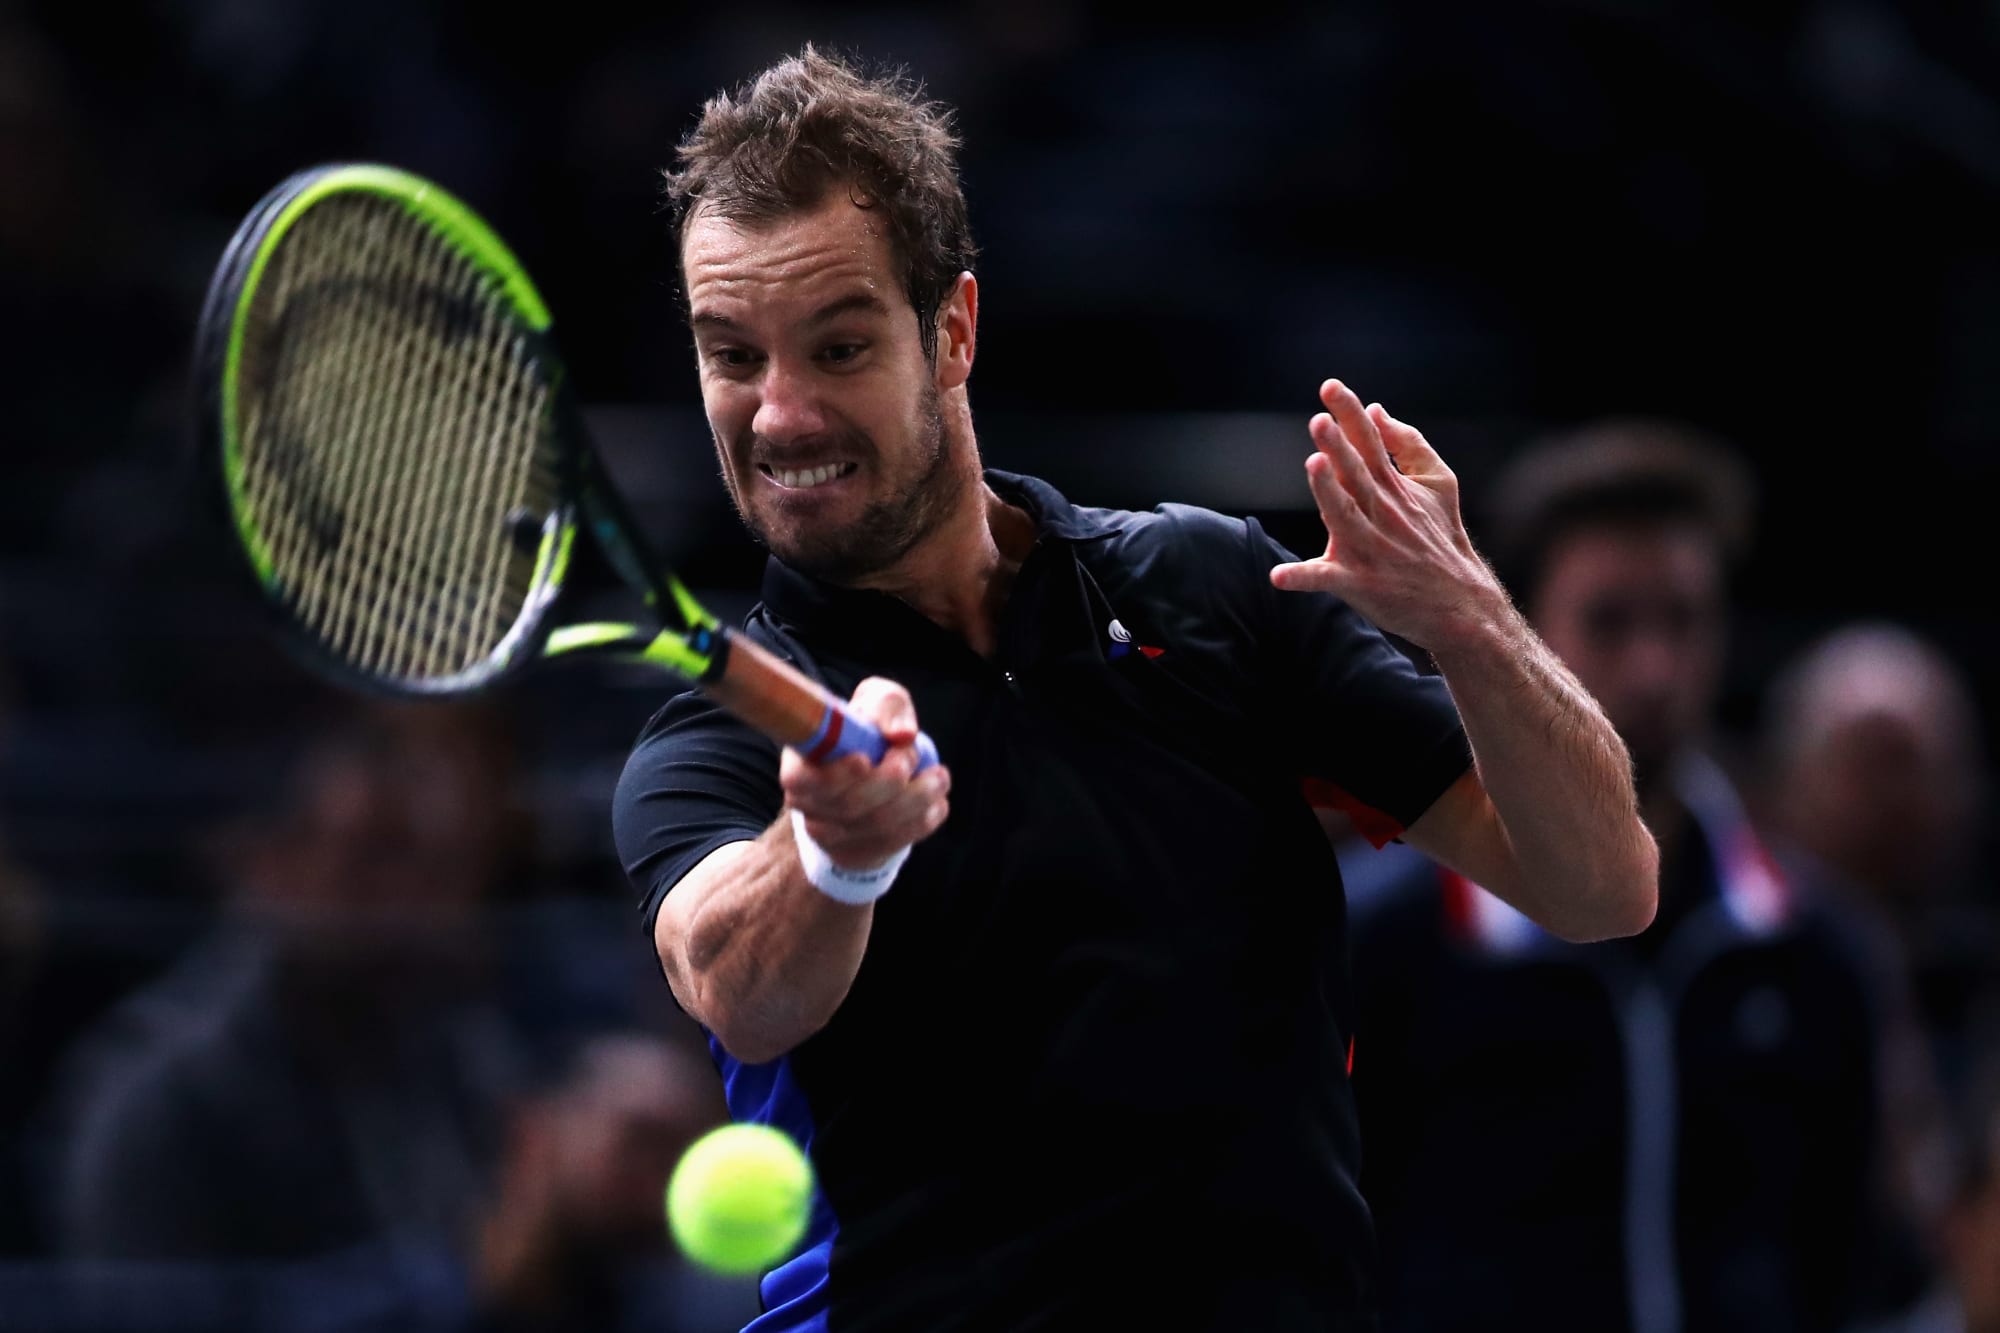 Paris Masters several French tennis players advance at ATP event